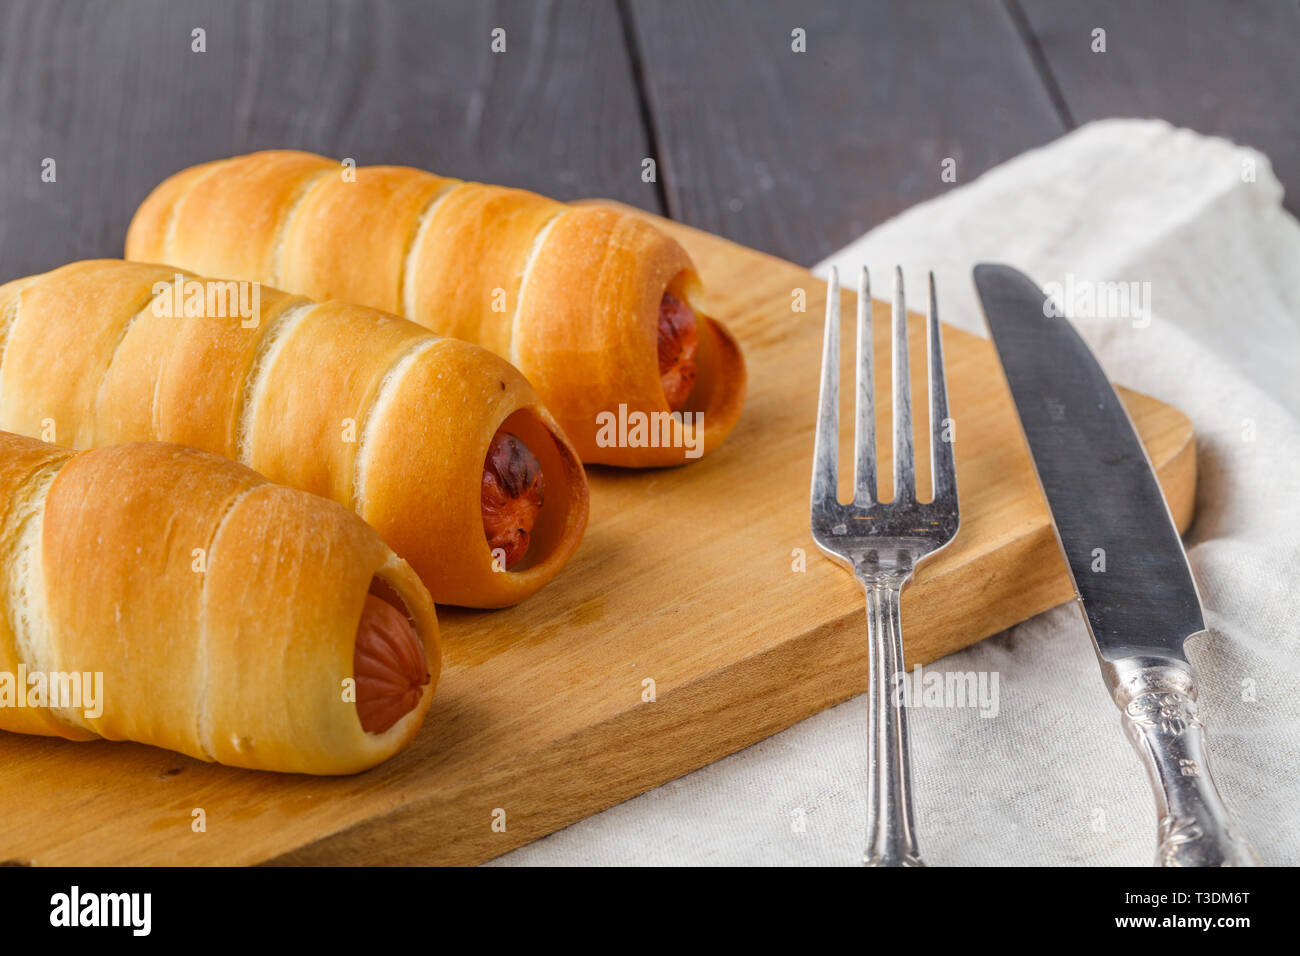 Home made pigs in a blanket. Sausages rolled in croissant dough, baked Stock Photo